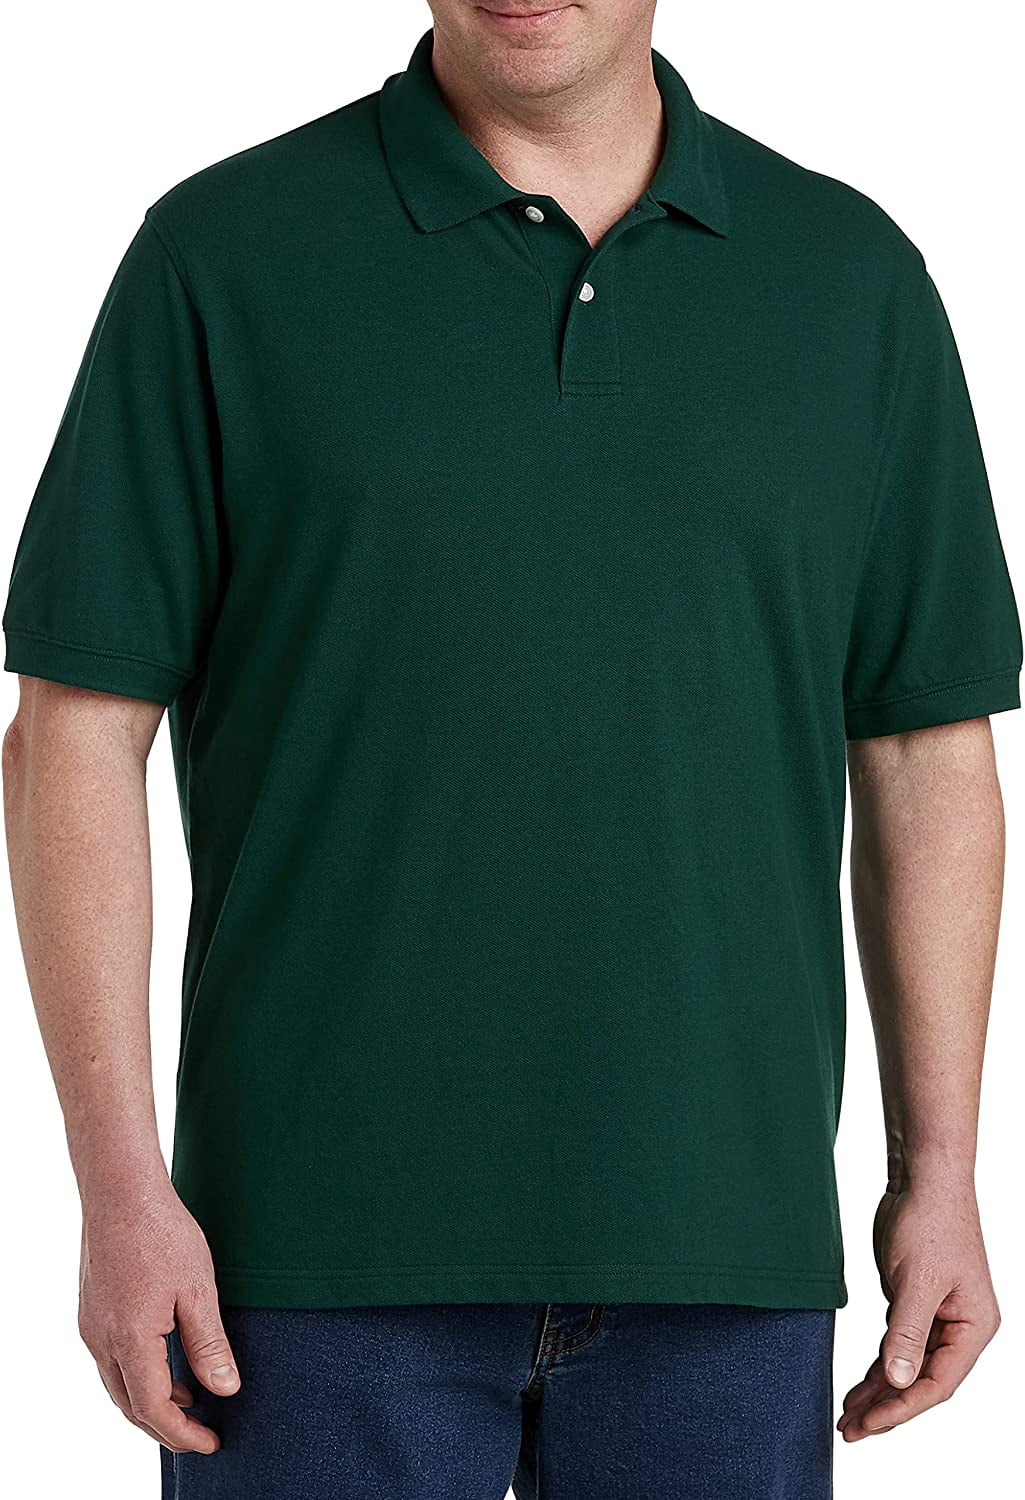 Female cotton poly pique blend short sleeve polo shirt in hunter green